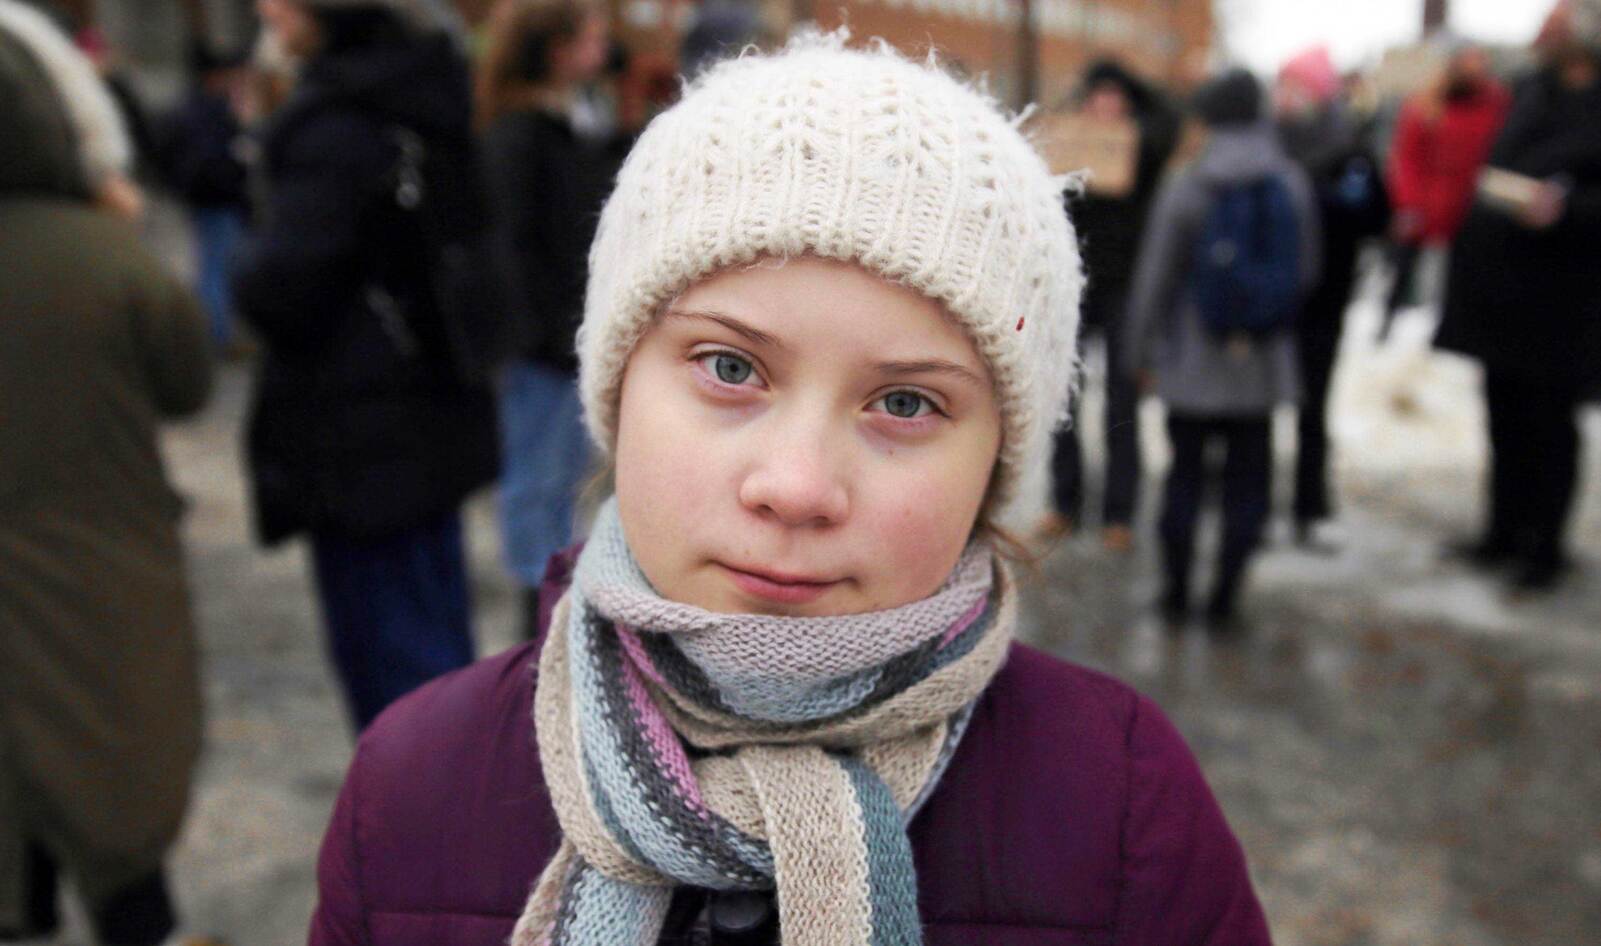 Greta Thunberg Recovers from COVID-19 Symptoms, Urges Young People to Stay at Home